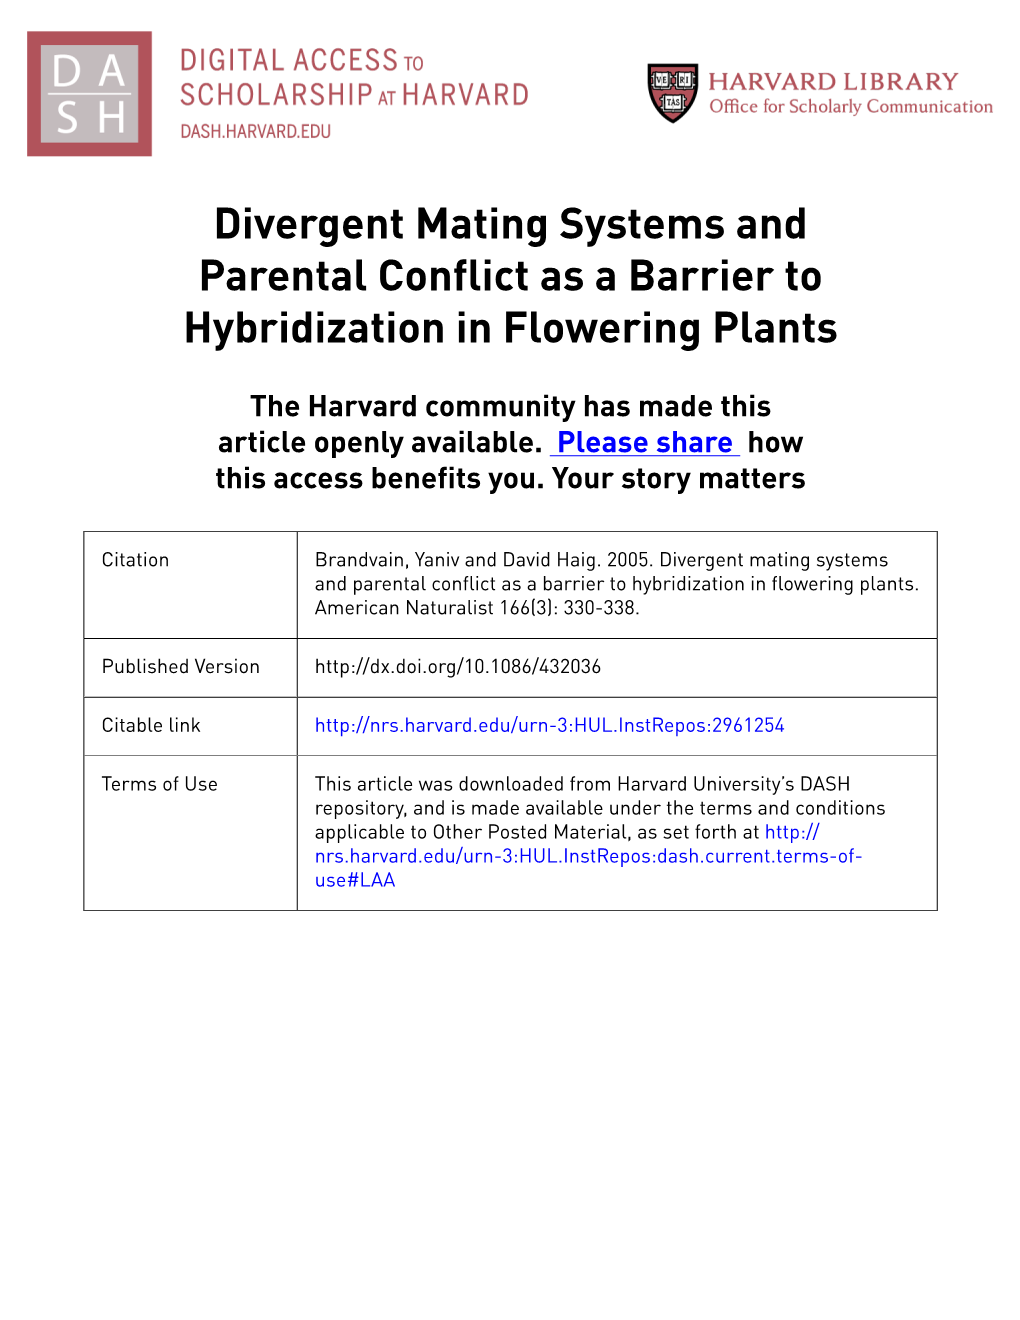 Divergent Mating Systems and Parental Conflict As a Barrier to Hybridization in Flowering Plants